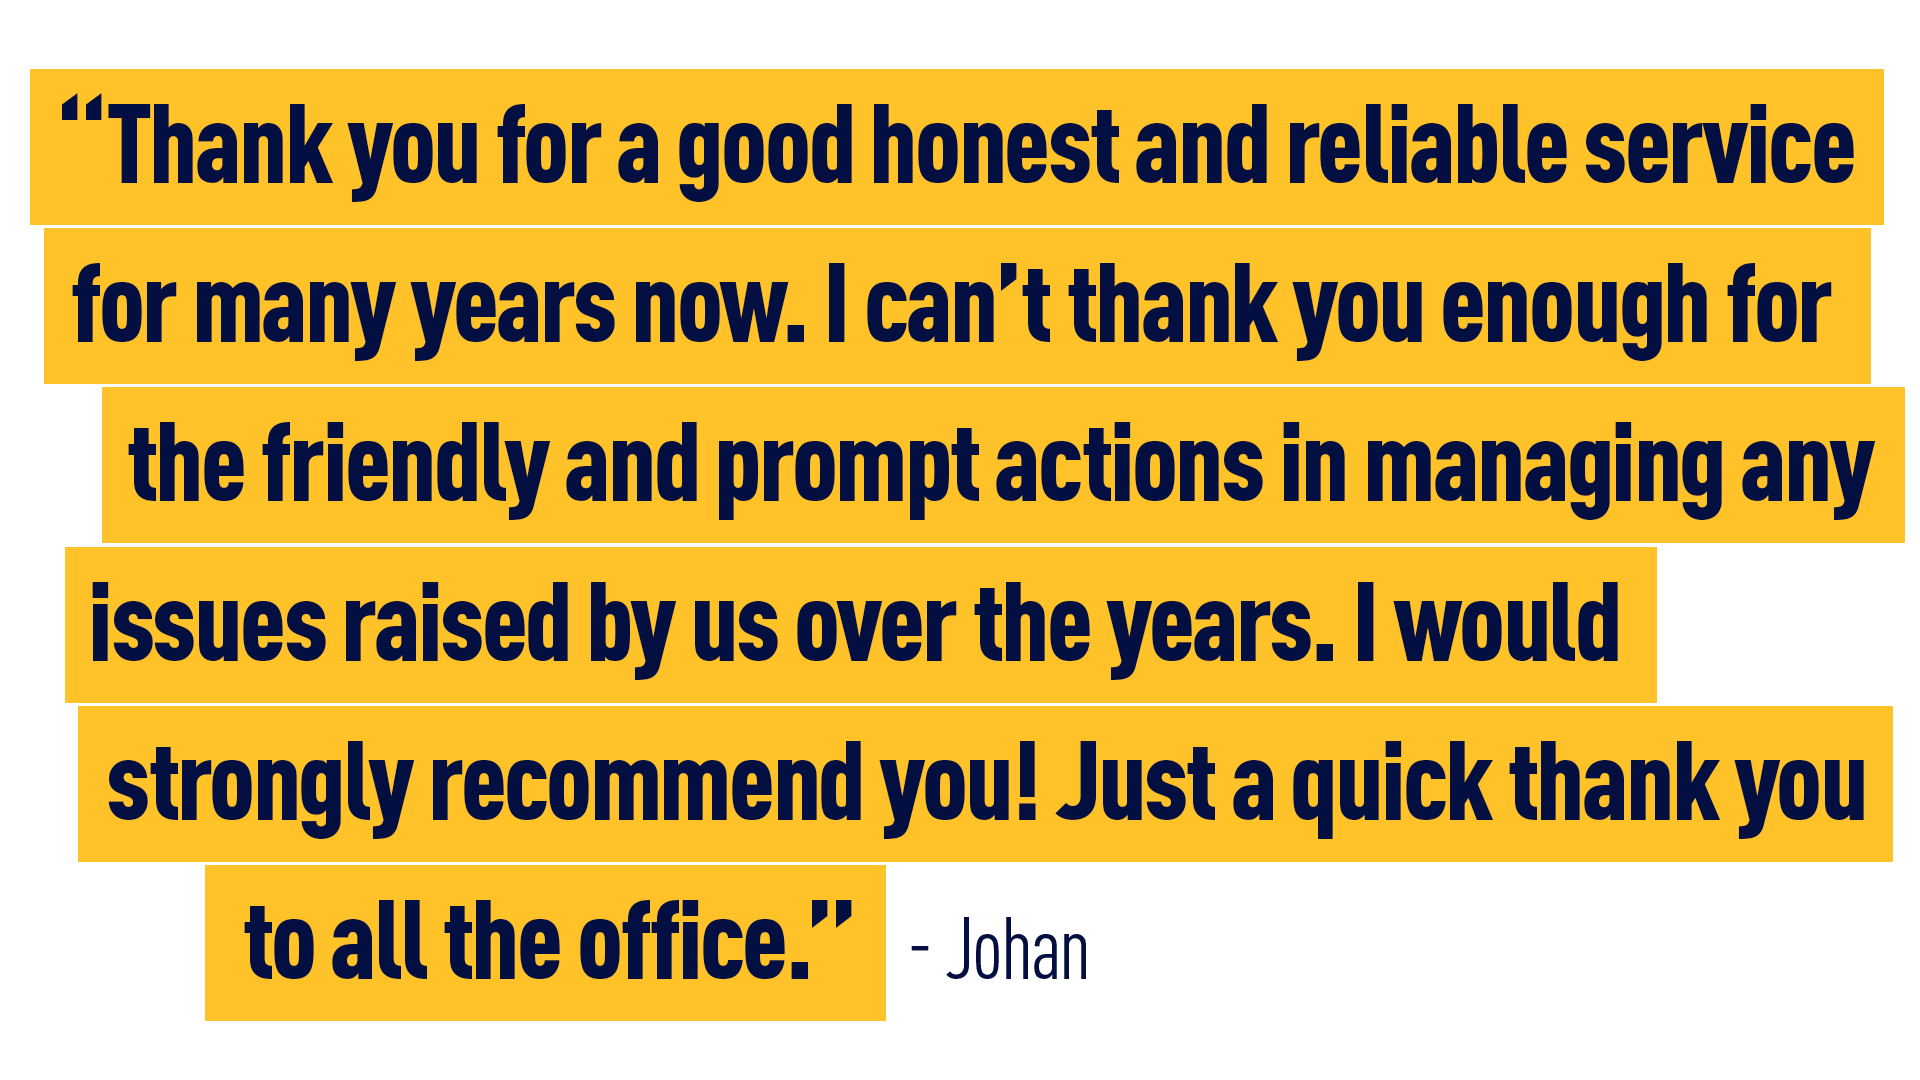 “Thank you for a good honest and reliable service for many years now. I can't thank you enough for the friendly and prompt actions in managing any issues raised by us over the years. I would strongly recommend you!  Just a quick thank you to all the office” Johan 